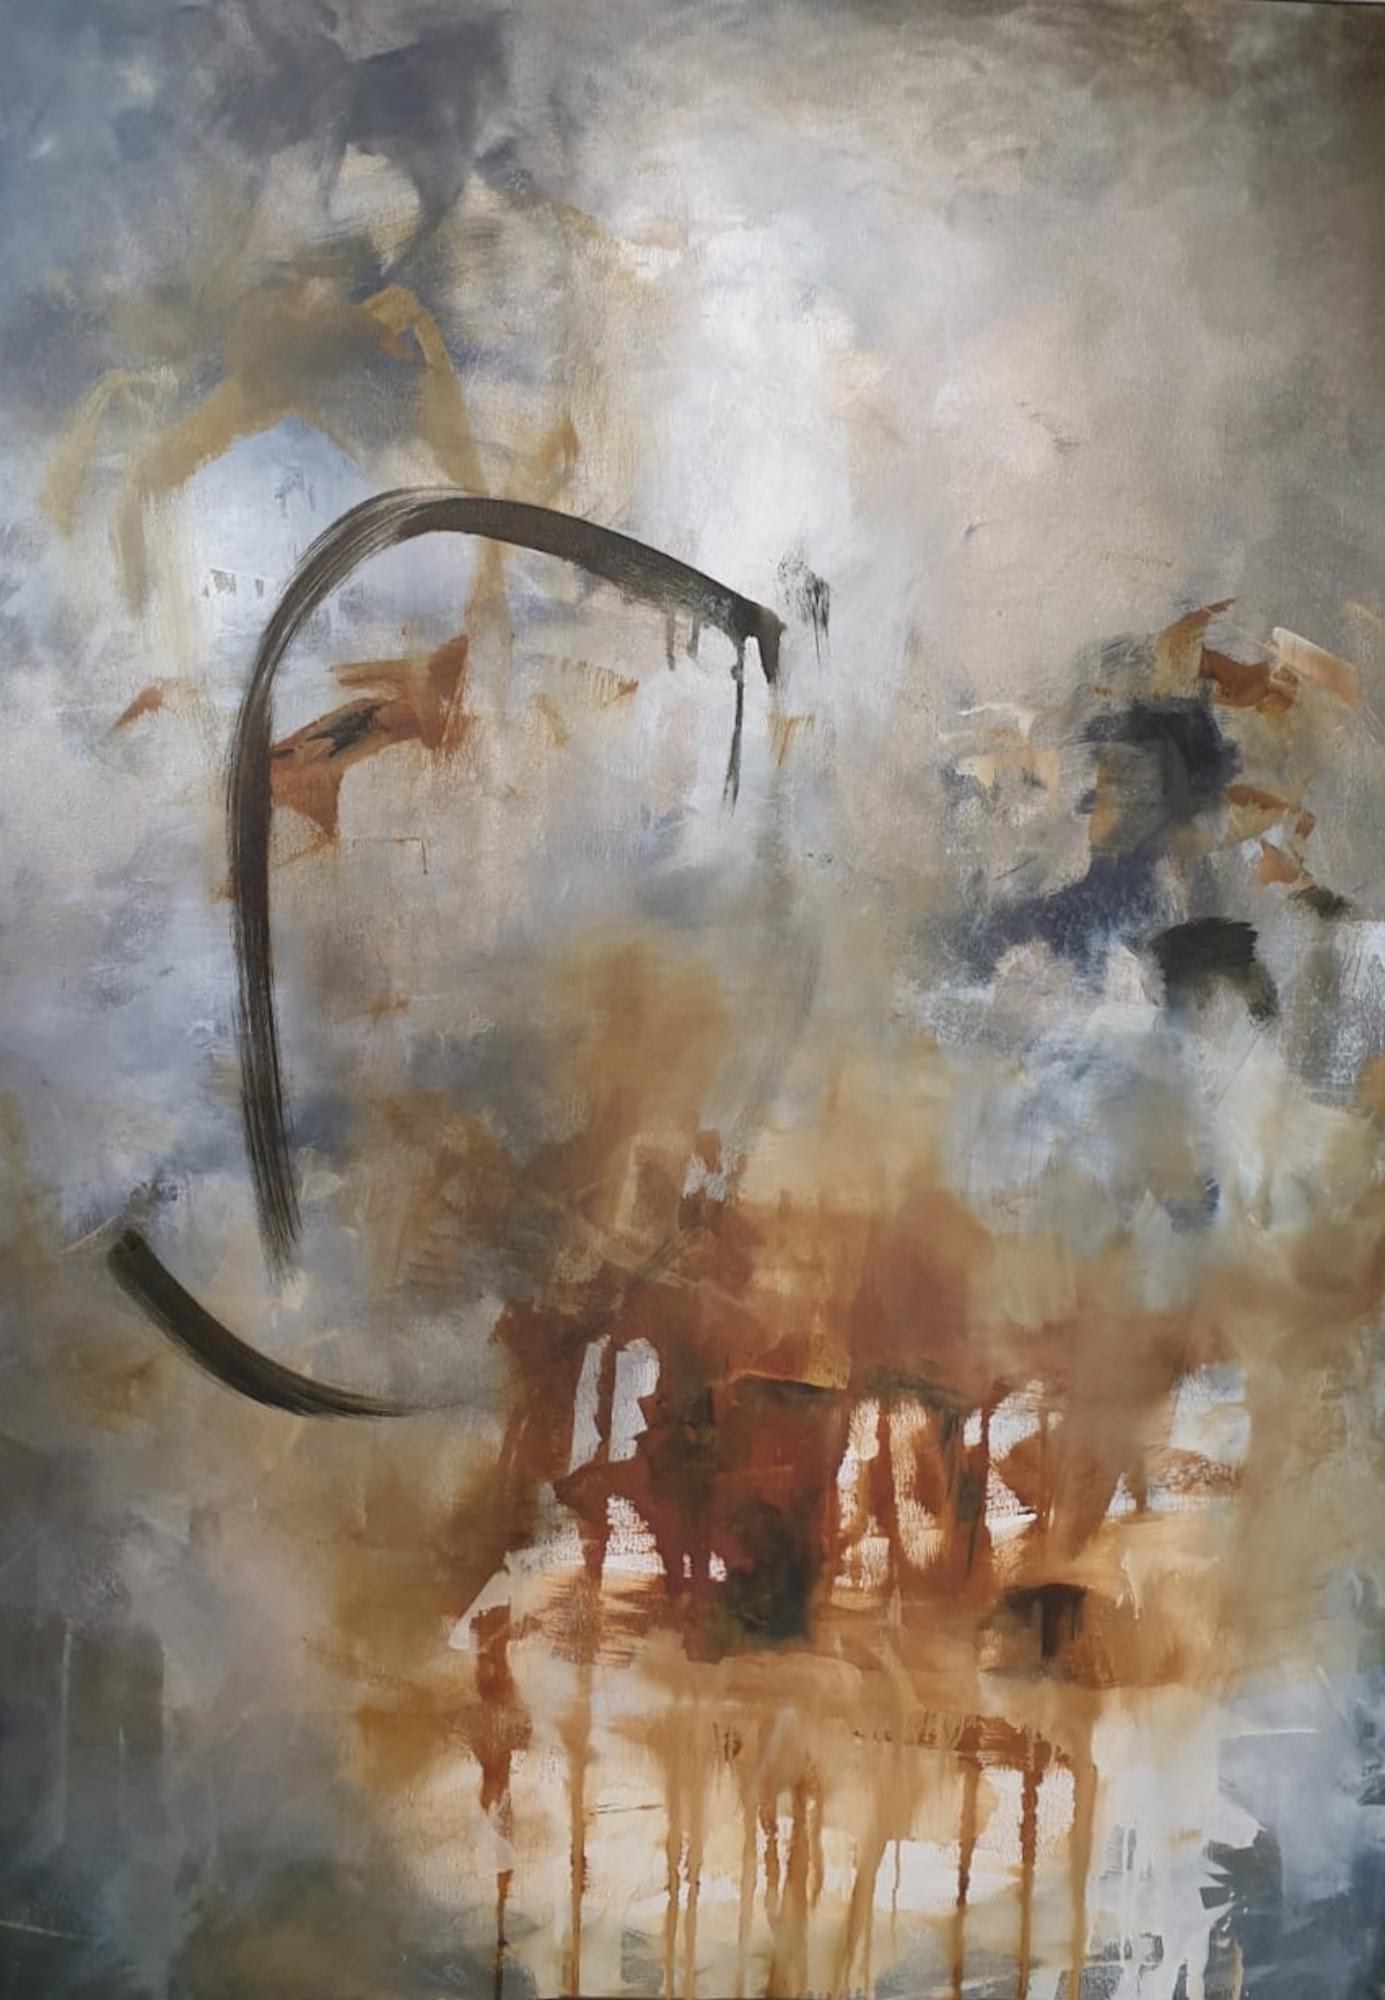 Untitled by Catheine Pennington-Meyer is an original painting. This moody contemporary artwork is almost stormy in nature, and adds dynamism and a modern, graphic edge to an interiors scheme.
Catherine Pennington-Meyer is available online and in our